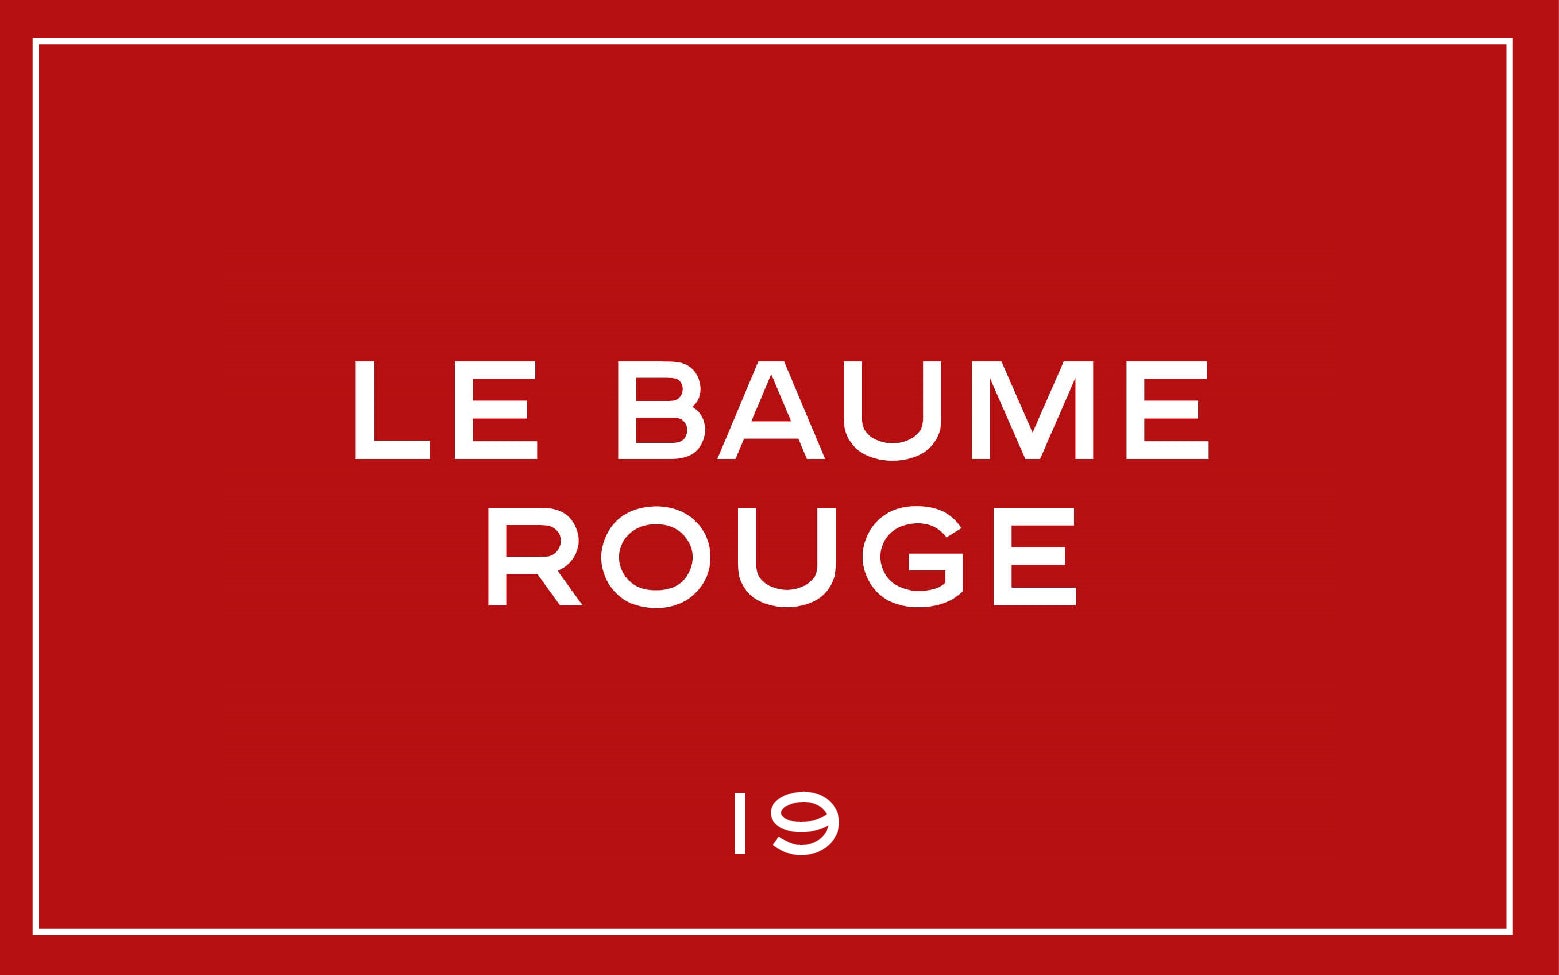 La bouche rouge Red balm lipstick swatch with text